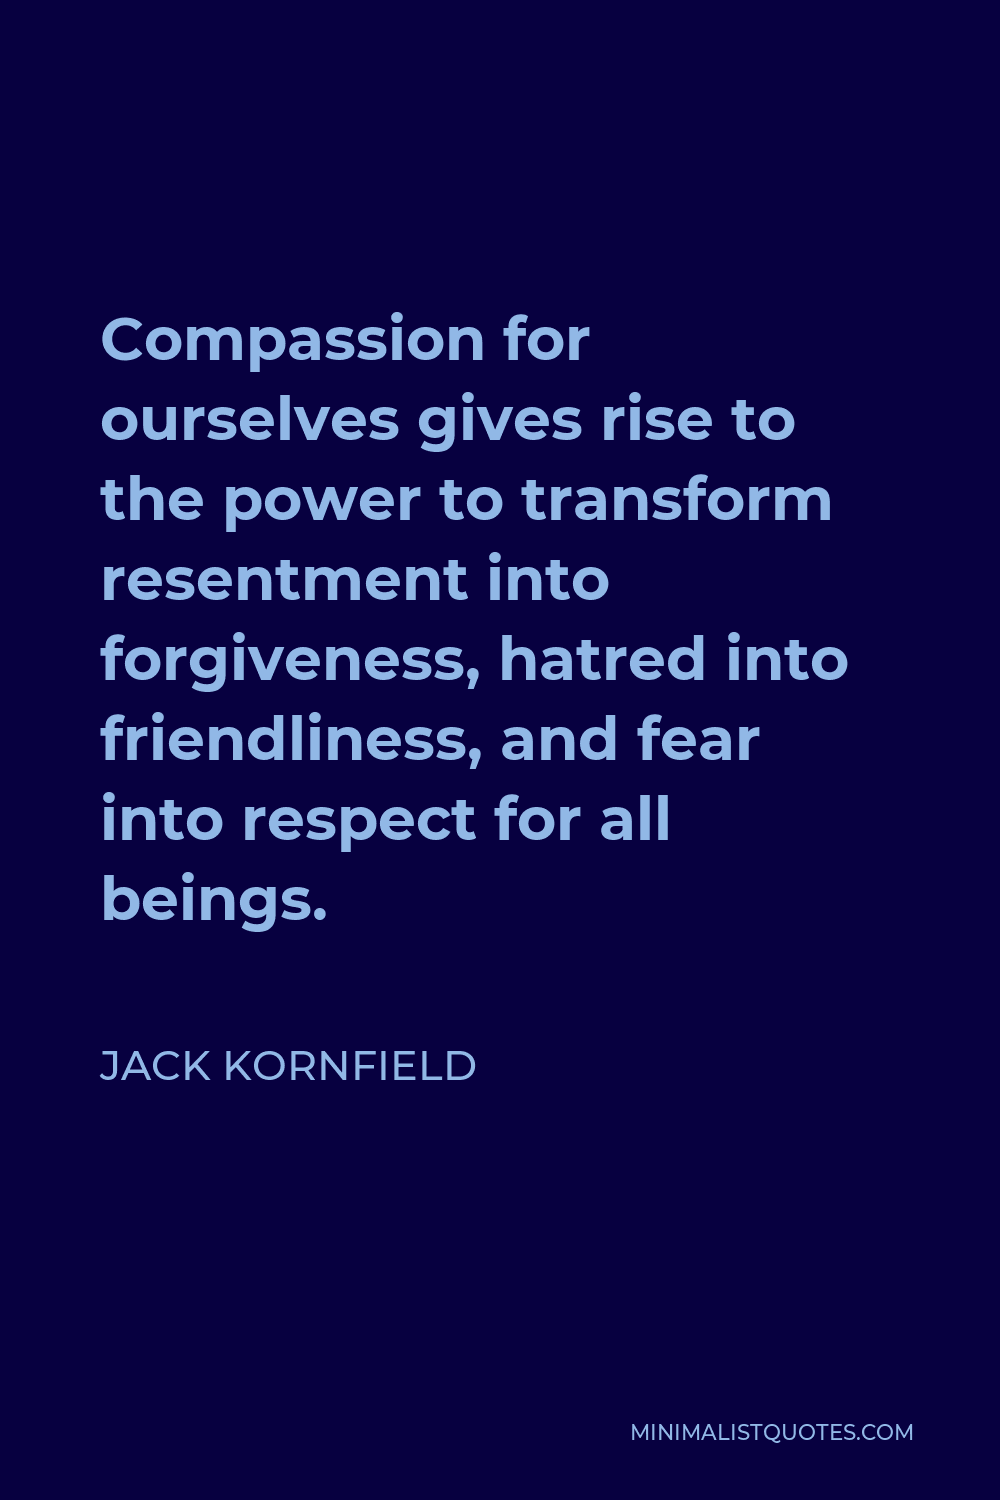 Jack Kornfield Quote - Compassion for ourselves gives rise to the power to transform resentment into forgiveness, hatred into friendliness, and fear into respect for all beings.